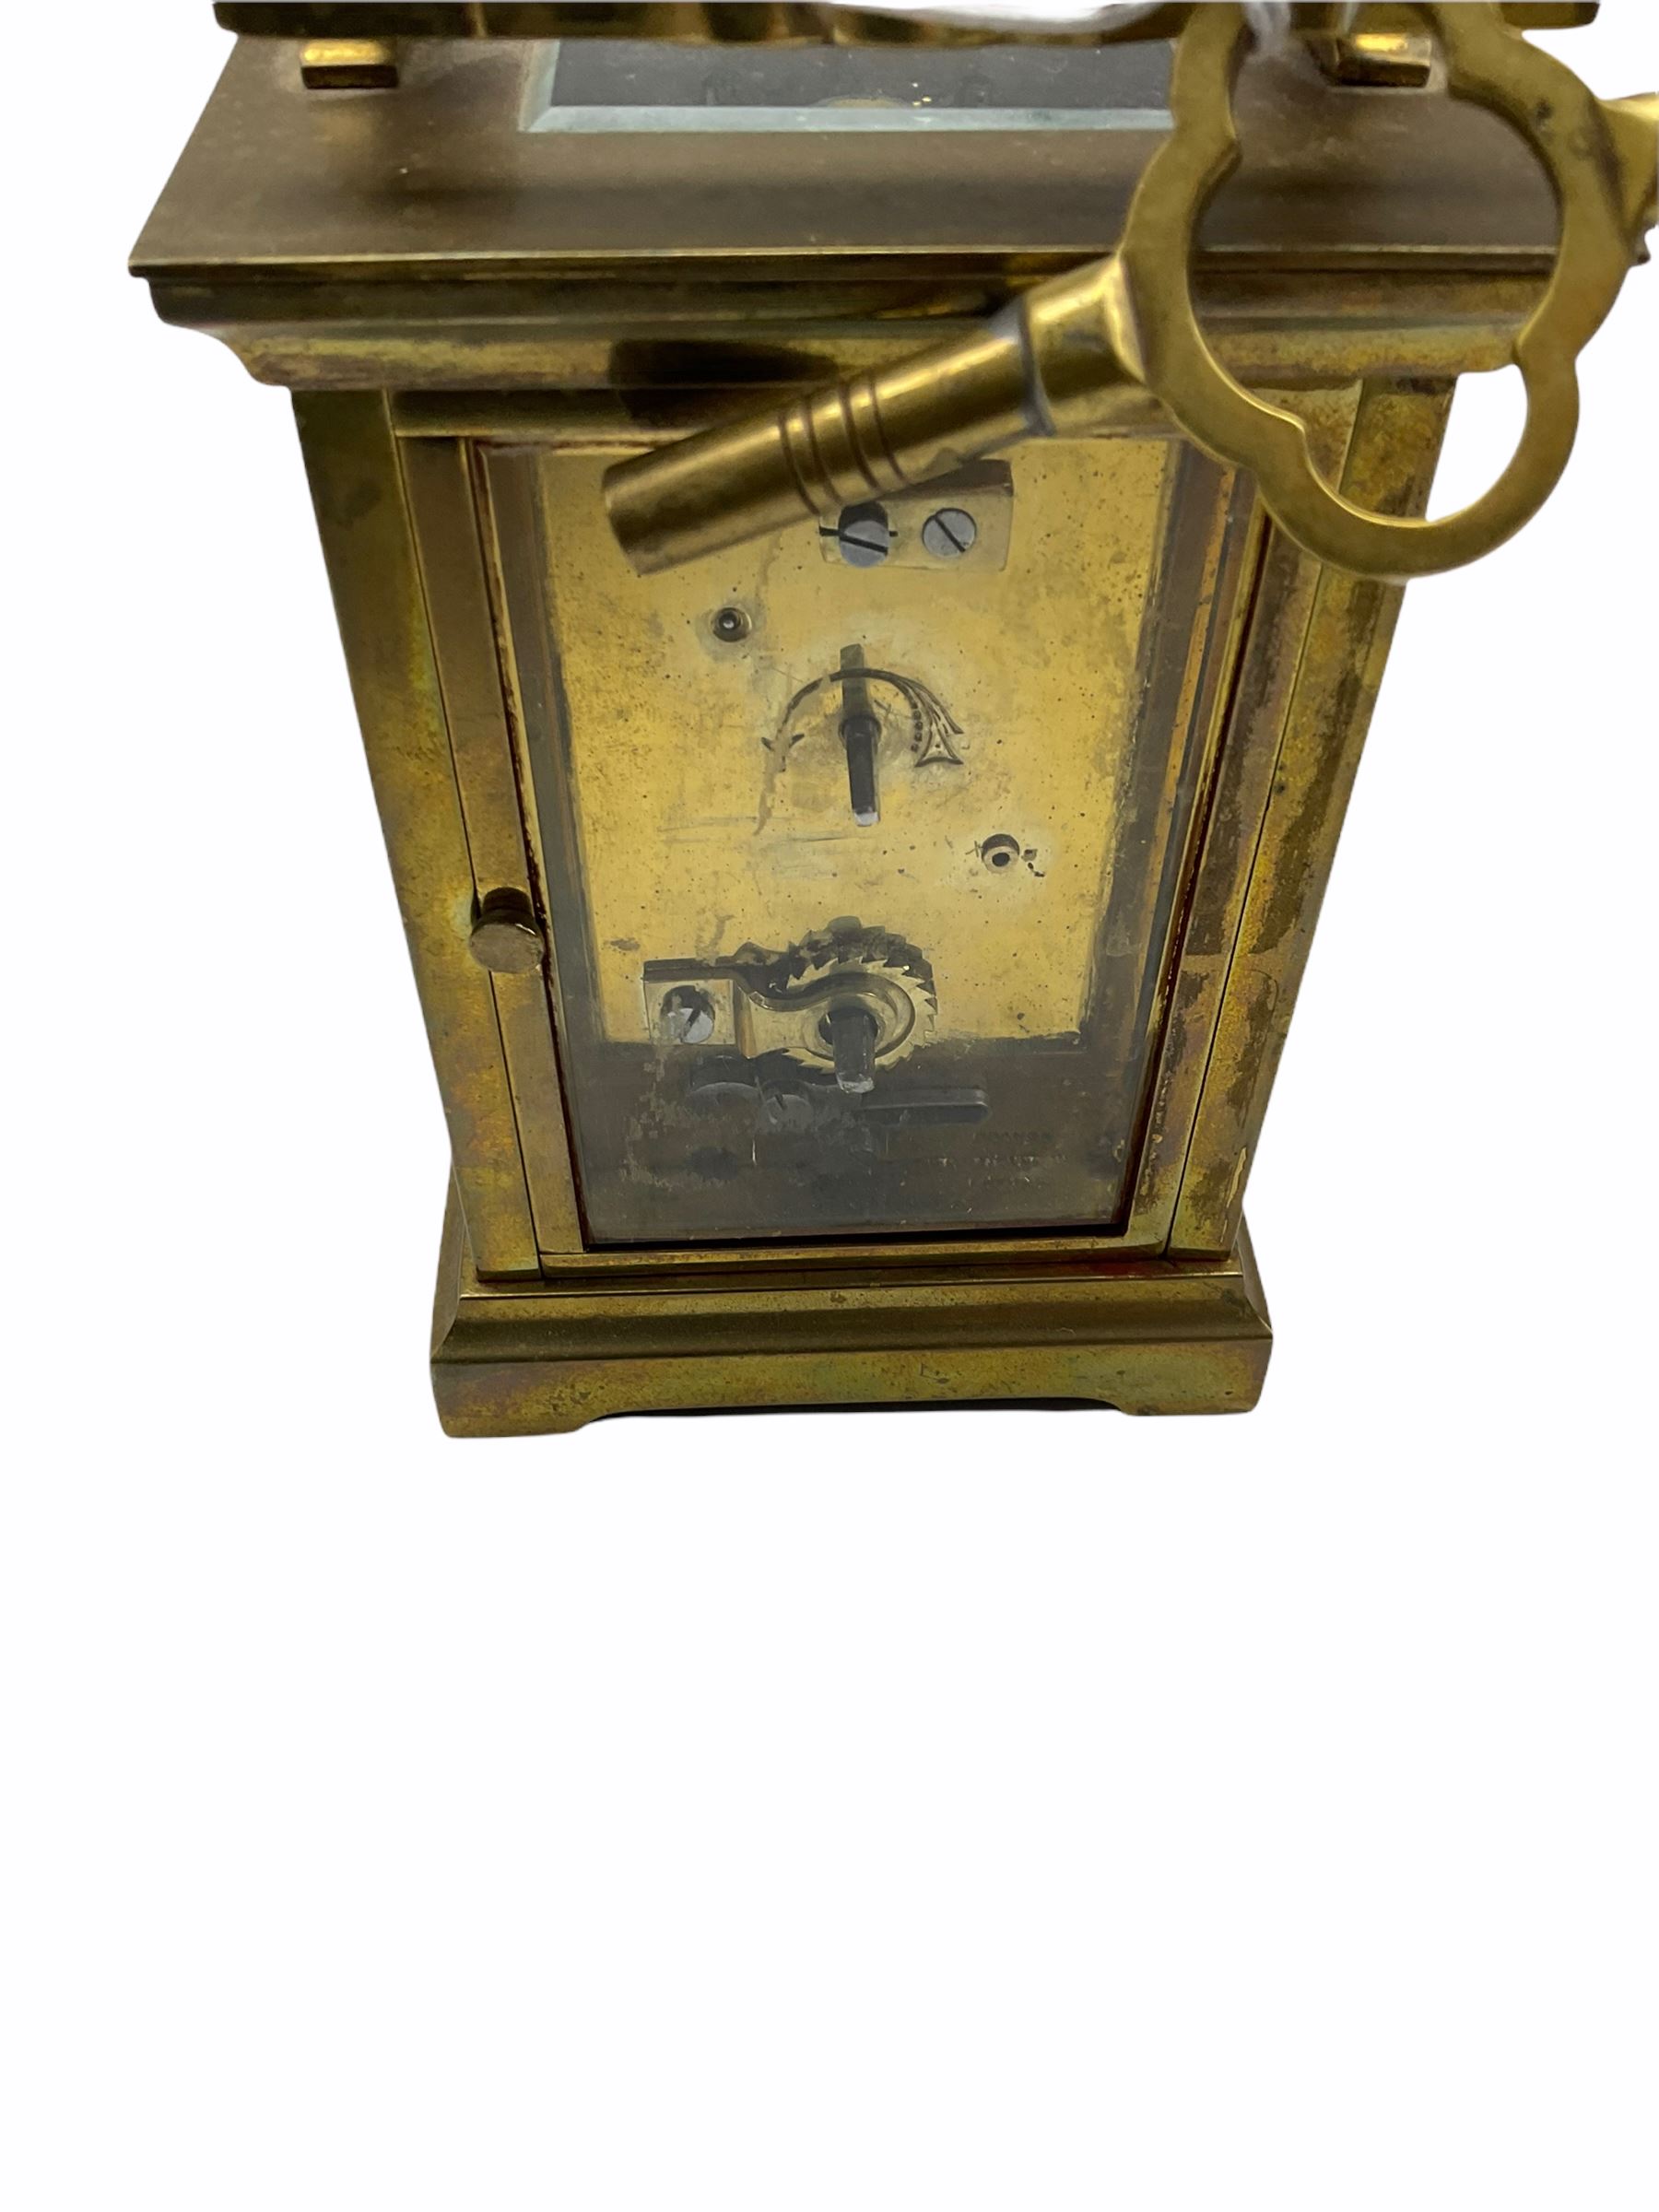 A French 20th century Anglaise cased 8-day timepiece carriage clock with a seven jewelled lever plat - Image 3 of 4